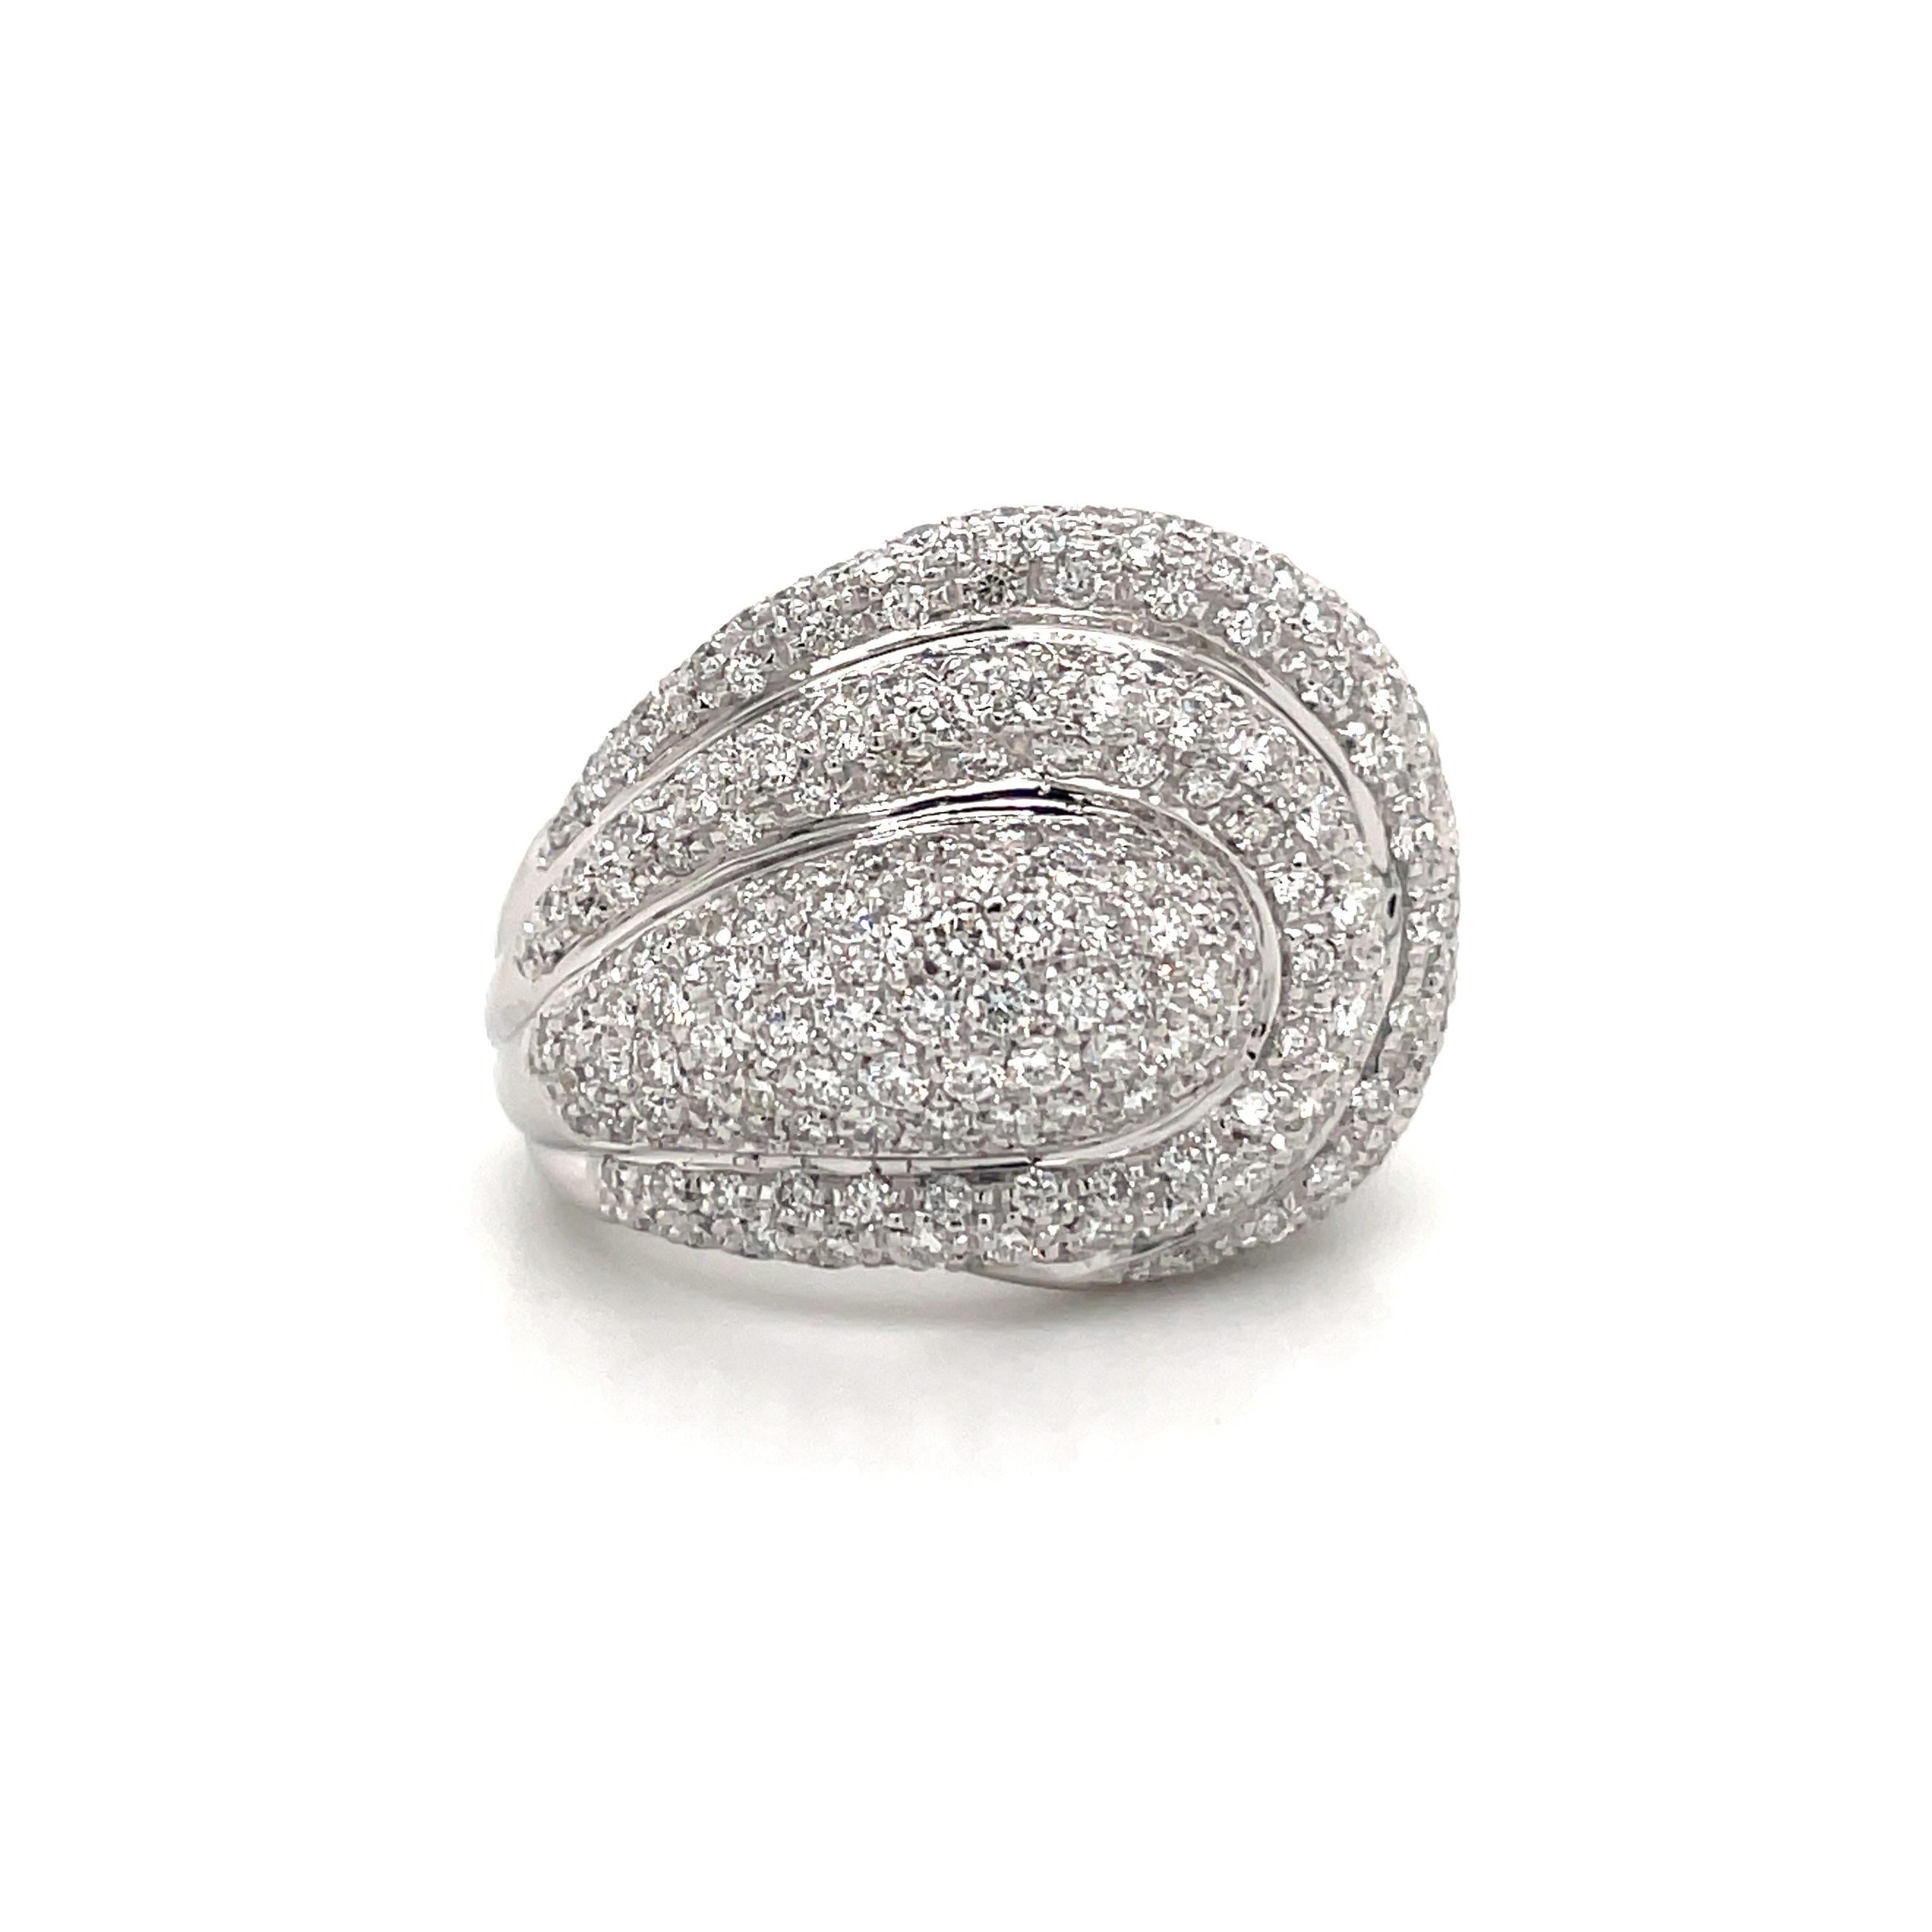 Chic dome cocktail ring featuring 268 round brilliants weighing 4 carats, crafted in 18k white gold. 
Color F-G
Clarity VS2
Size 7.5, sizeable
 